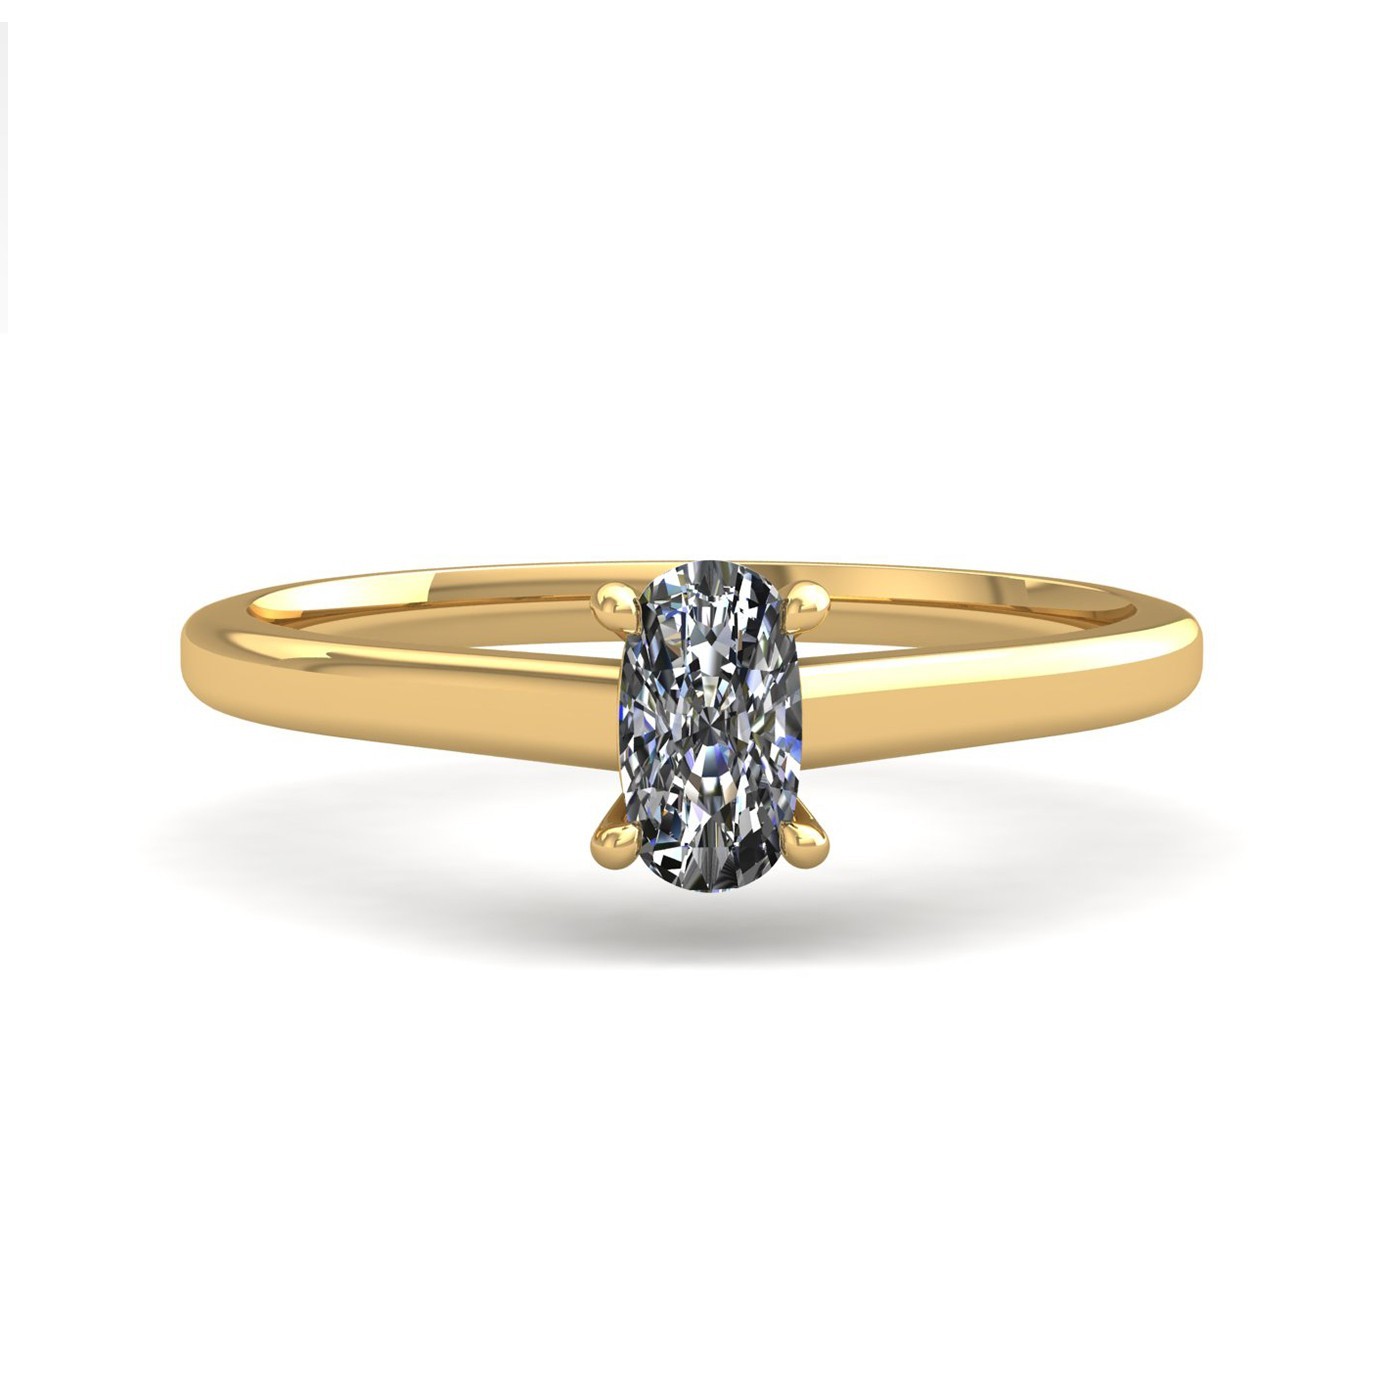 18k yellow gold  1.50 ct 4 prongs solitaire elongated cushion cut diamond engagement ring with whisper thin band Photos & images